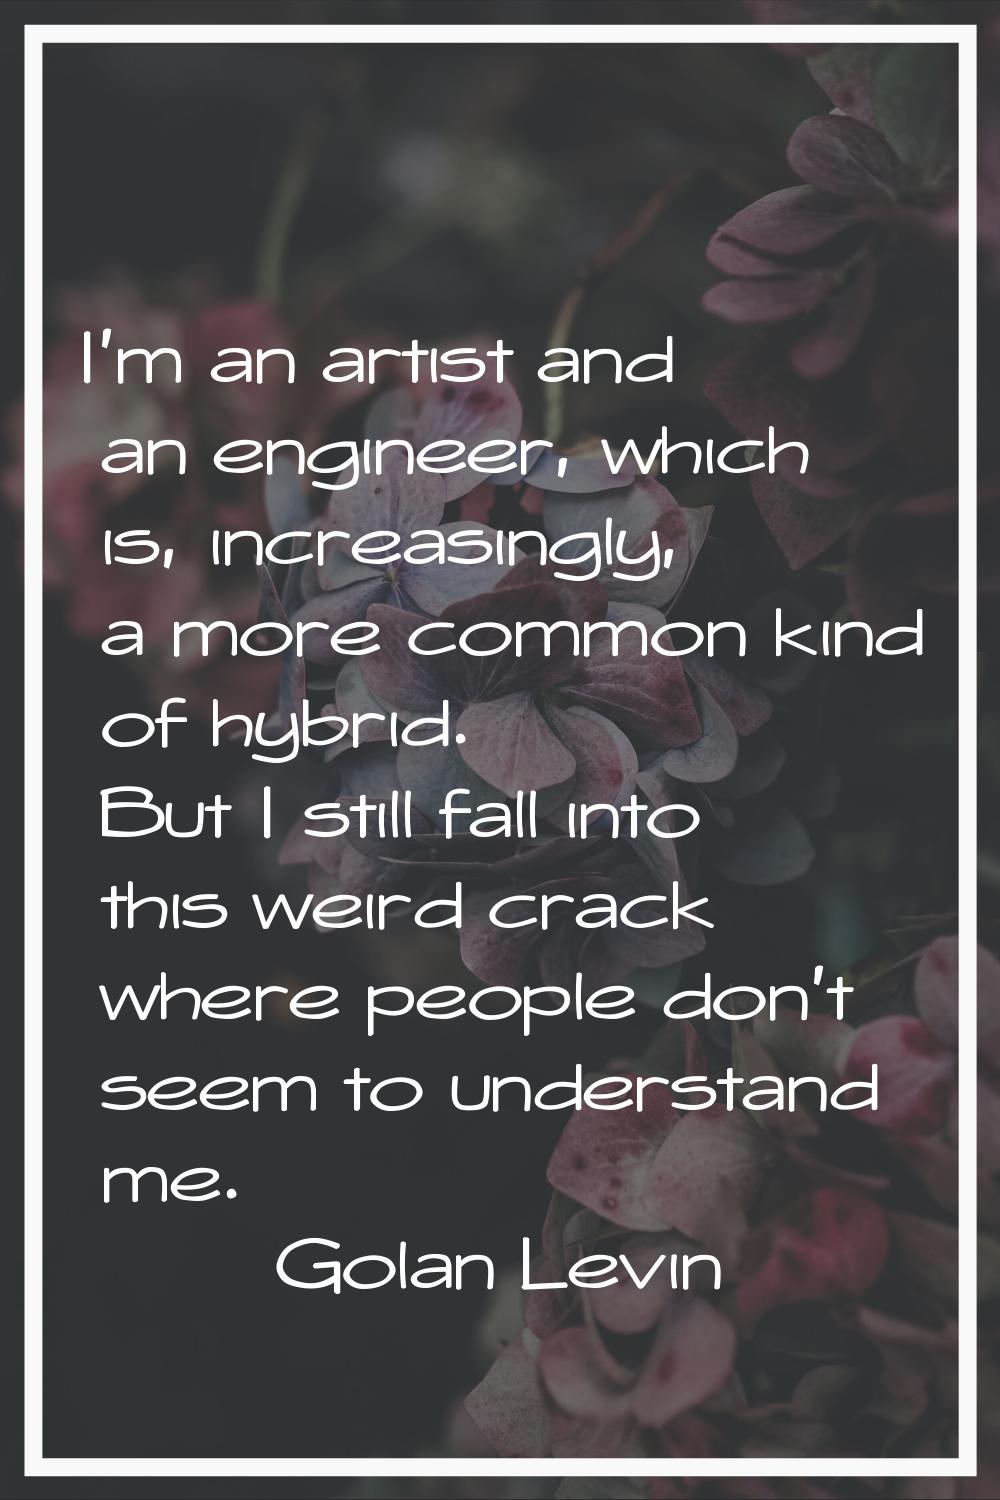 I'm an artist and an engineer, which is, increasingly, a more common kind of hybrid. But I still fa